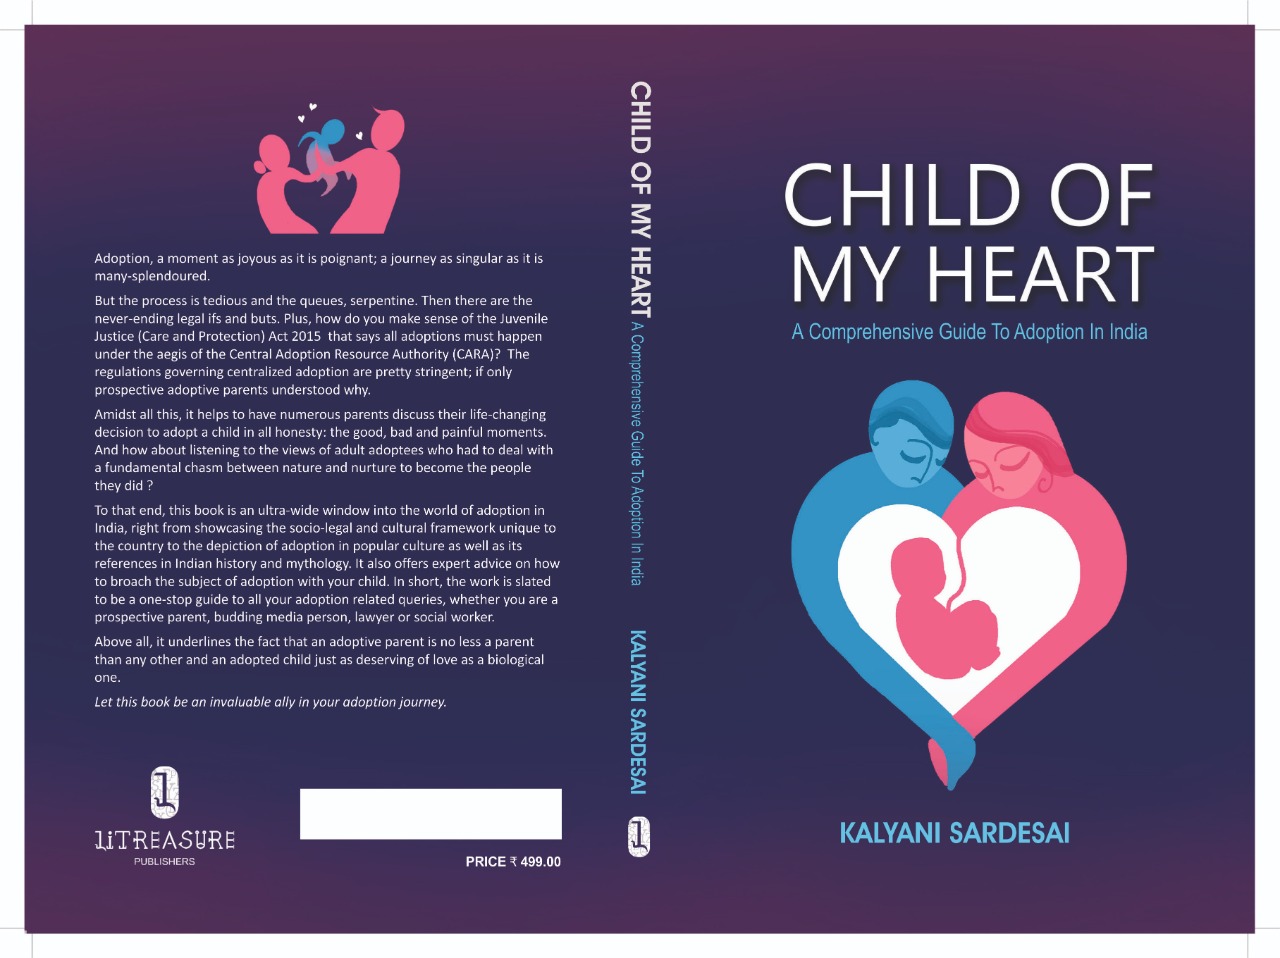 Child of My Heart: A Comprehensive Guide to Adoption in India